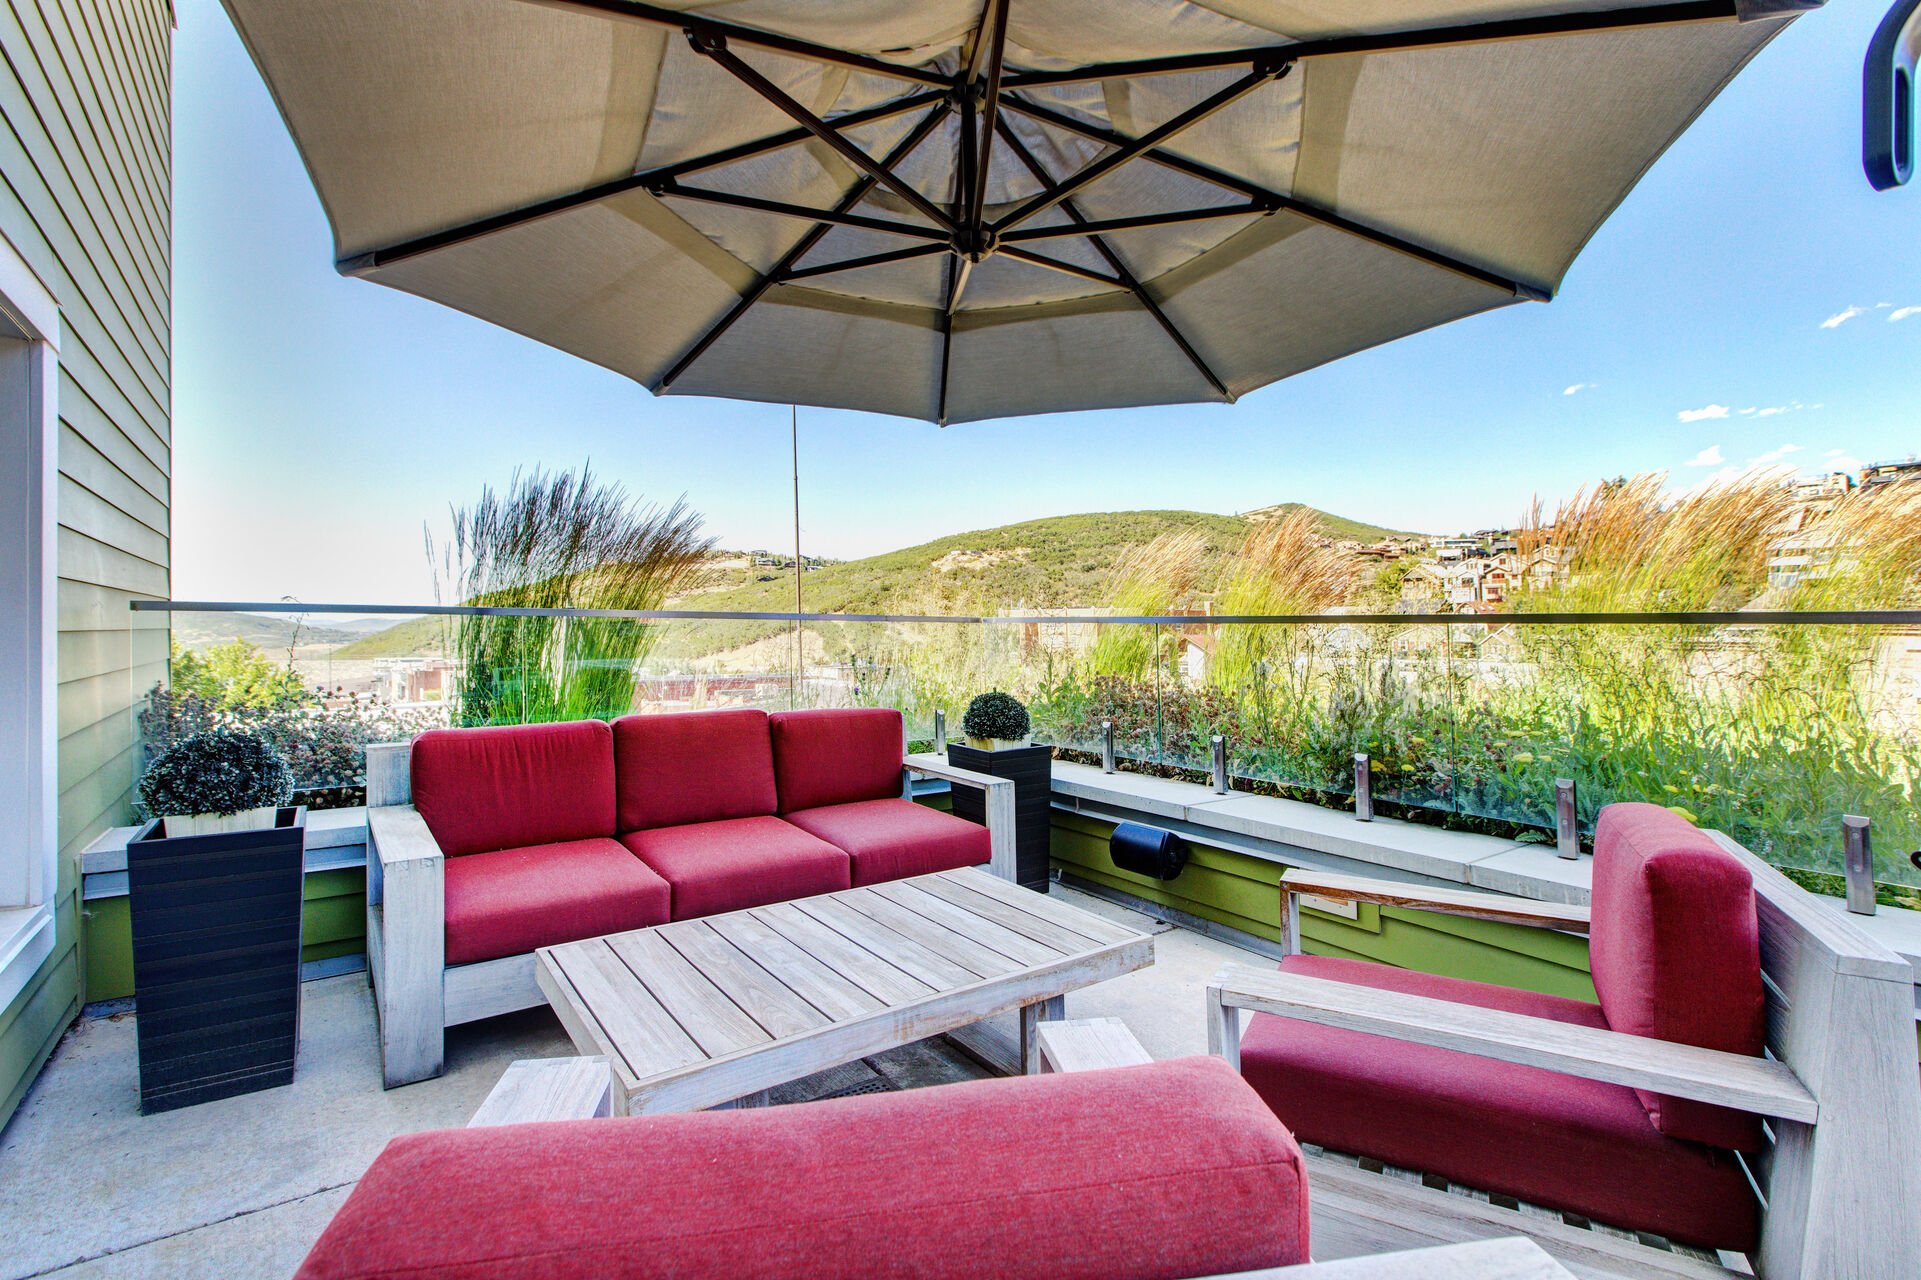 Patio Furnishings and a Sonos Speaker to Enjoy the Fresh Mountain Air and Views